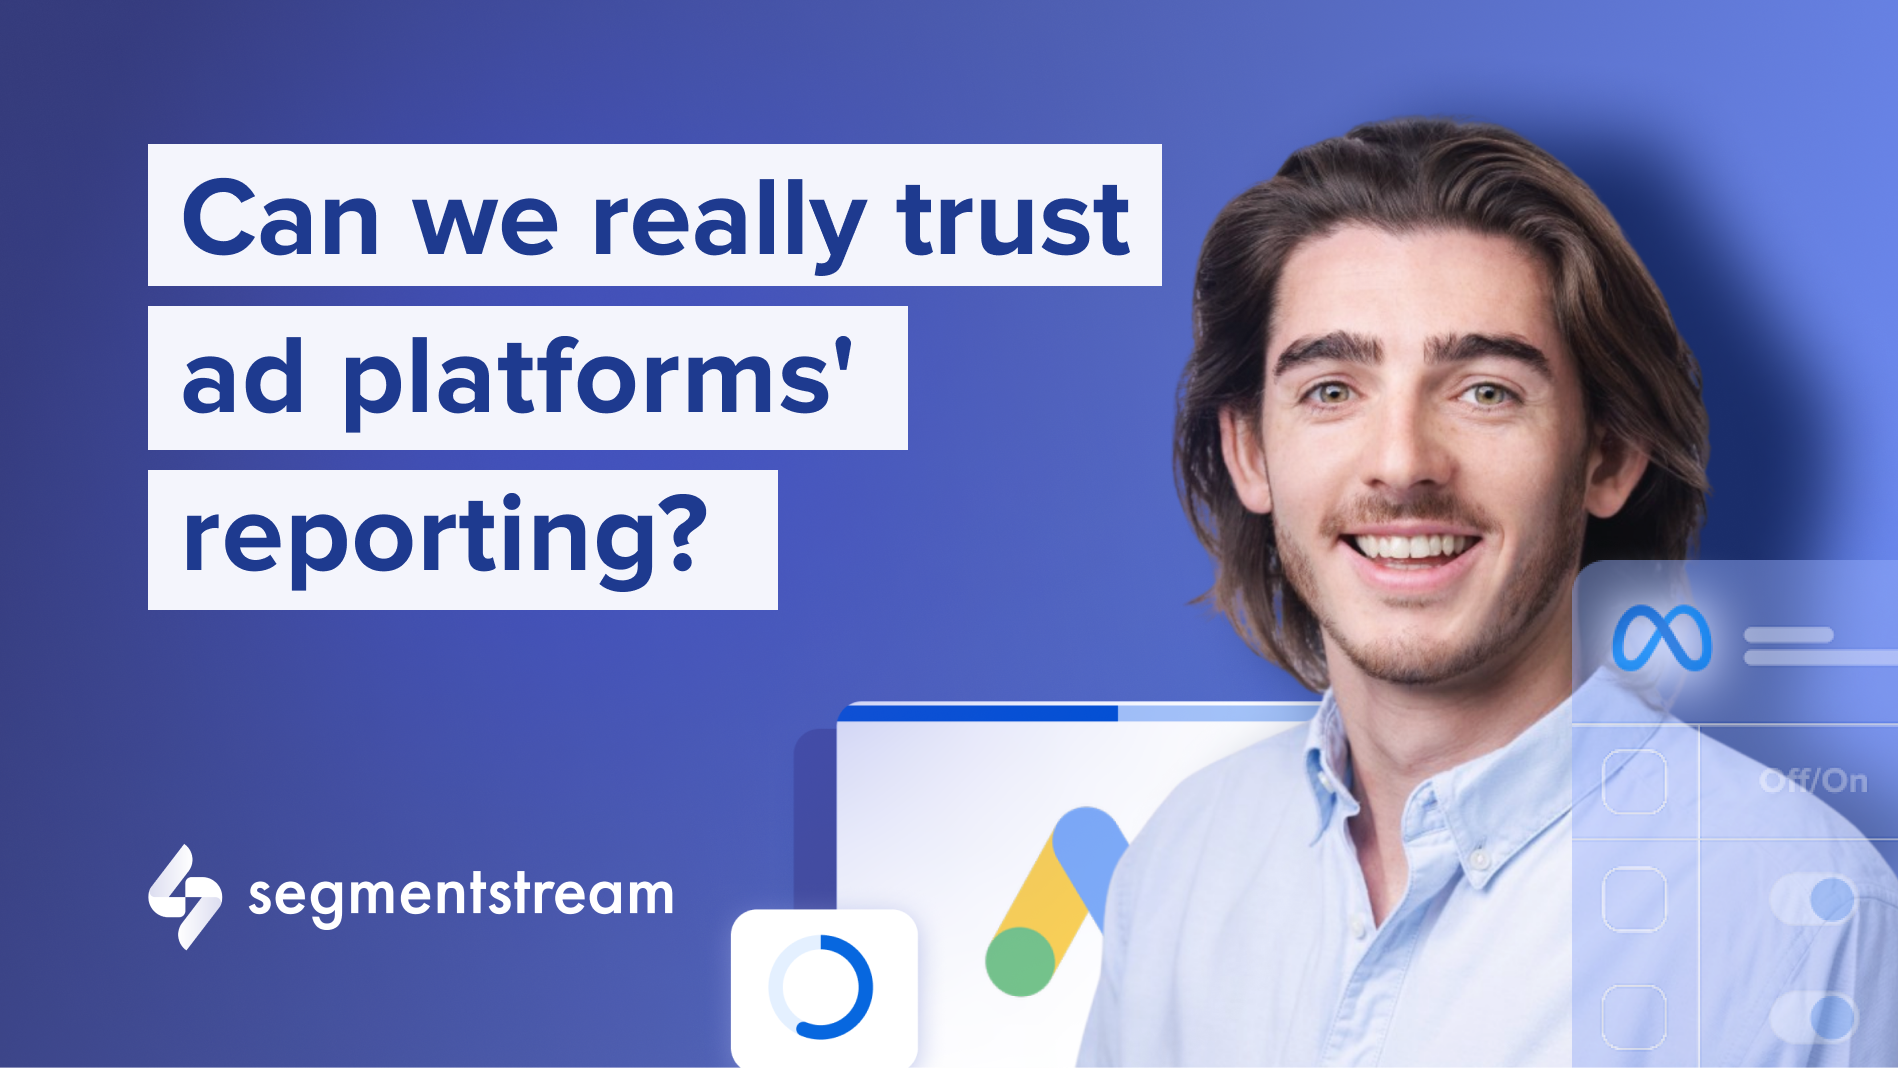 [VIDEO] Can we really trust ad platforms' reporting?